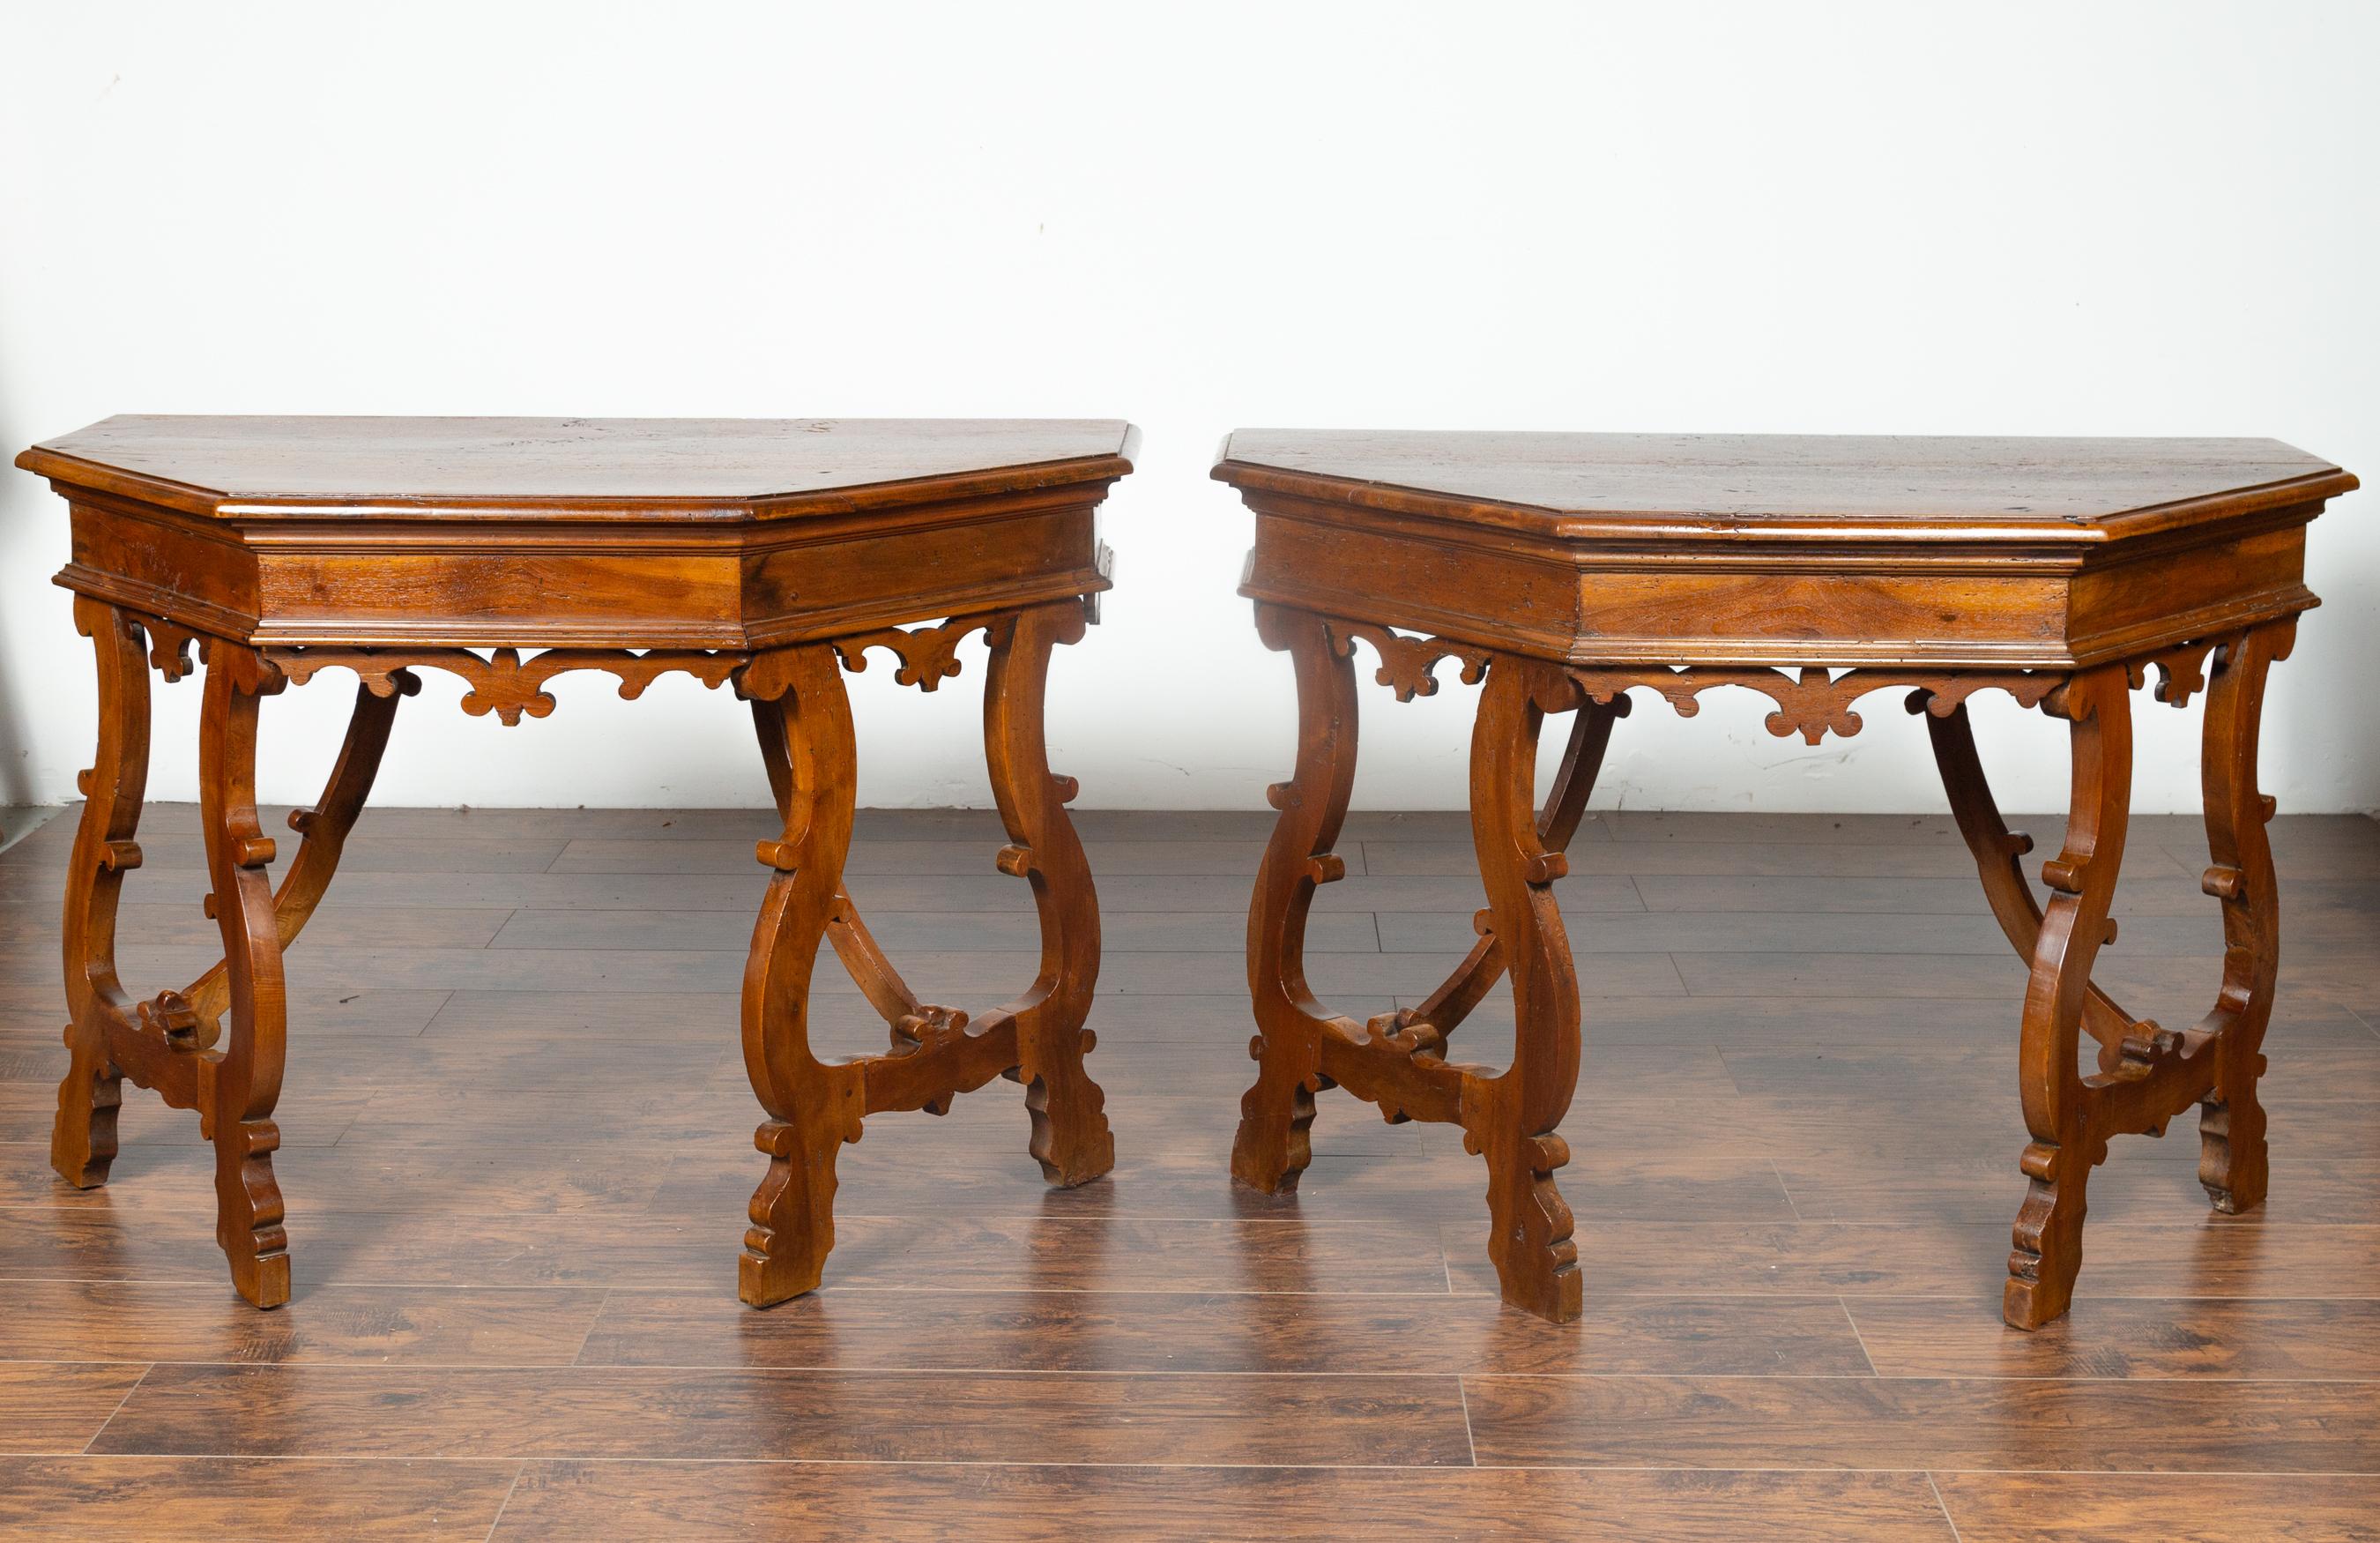 A pair of Italian walnut demilune tables from the mid 1800's  with polygonal tops and lyre base. Born in Italy during the mid 1800's , each of these exquisite demilunes features a polygonal top sitting above a stunning base. Lyre shaped legs are